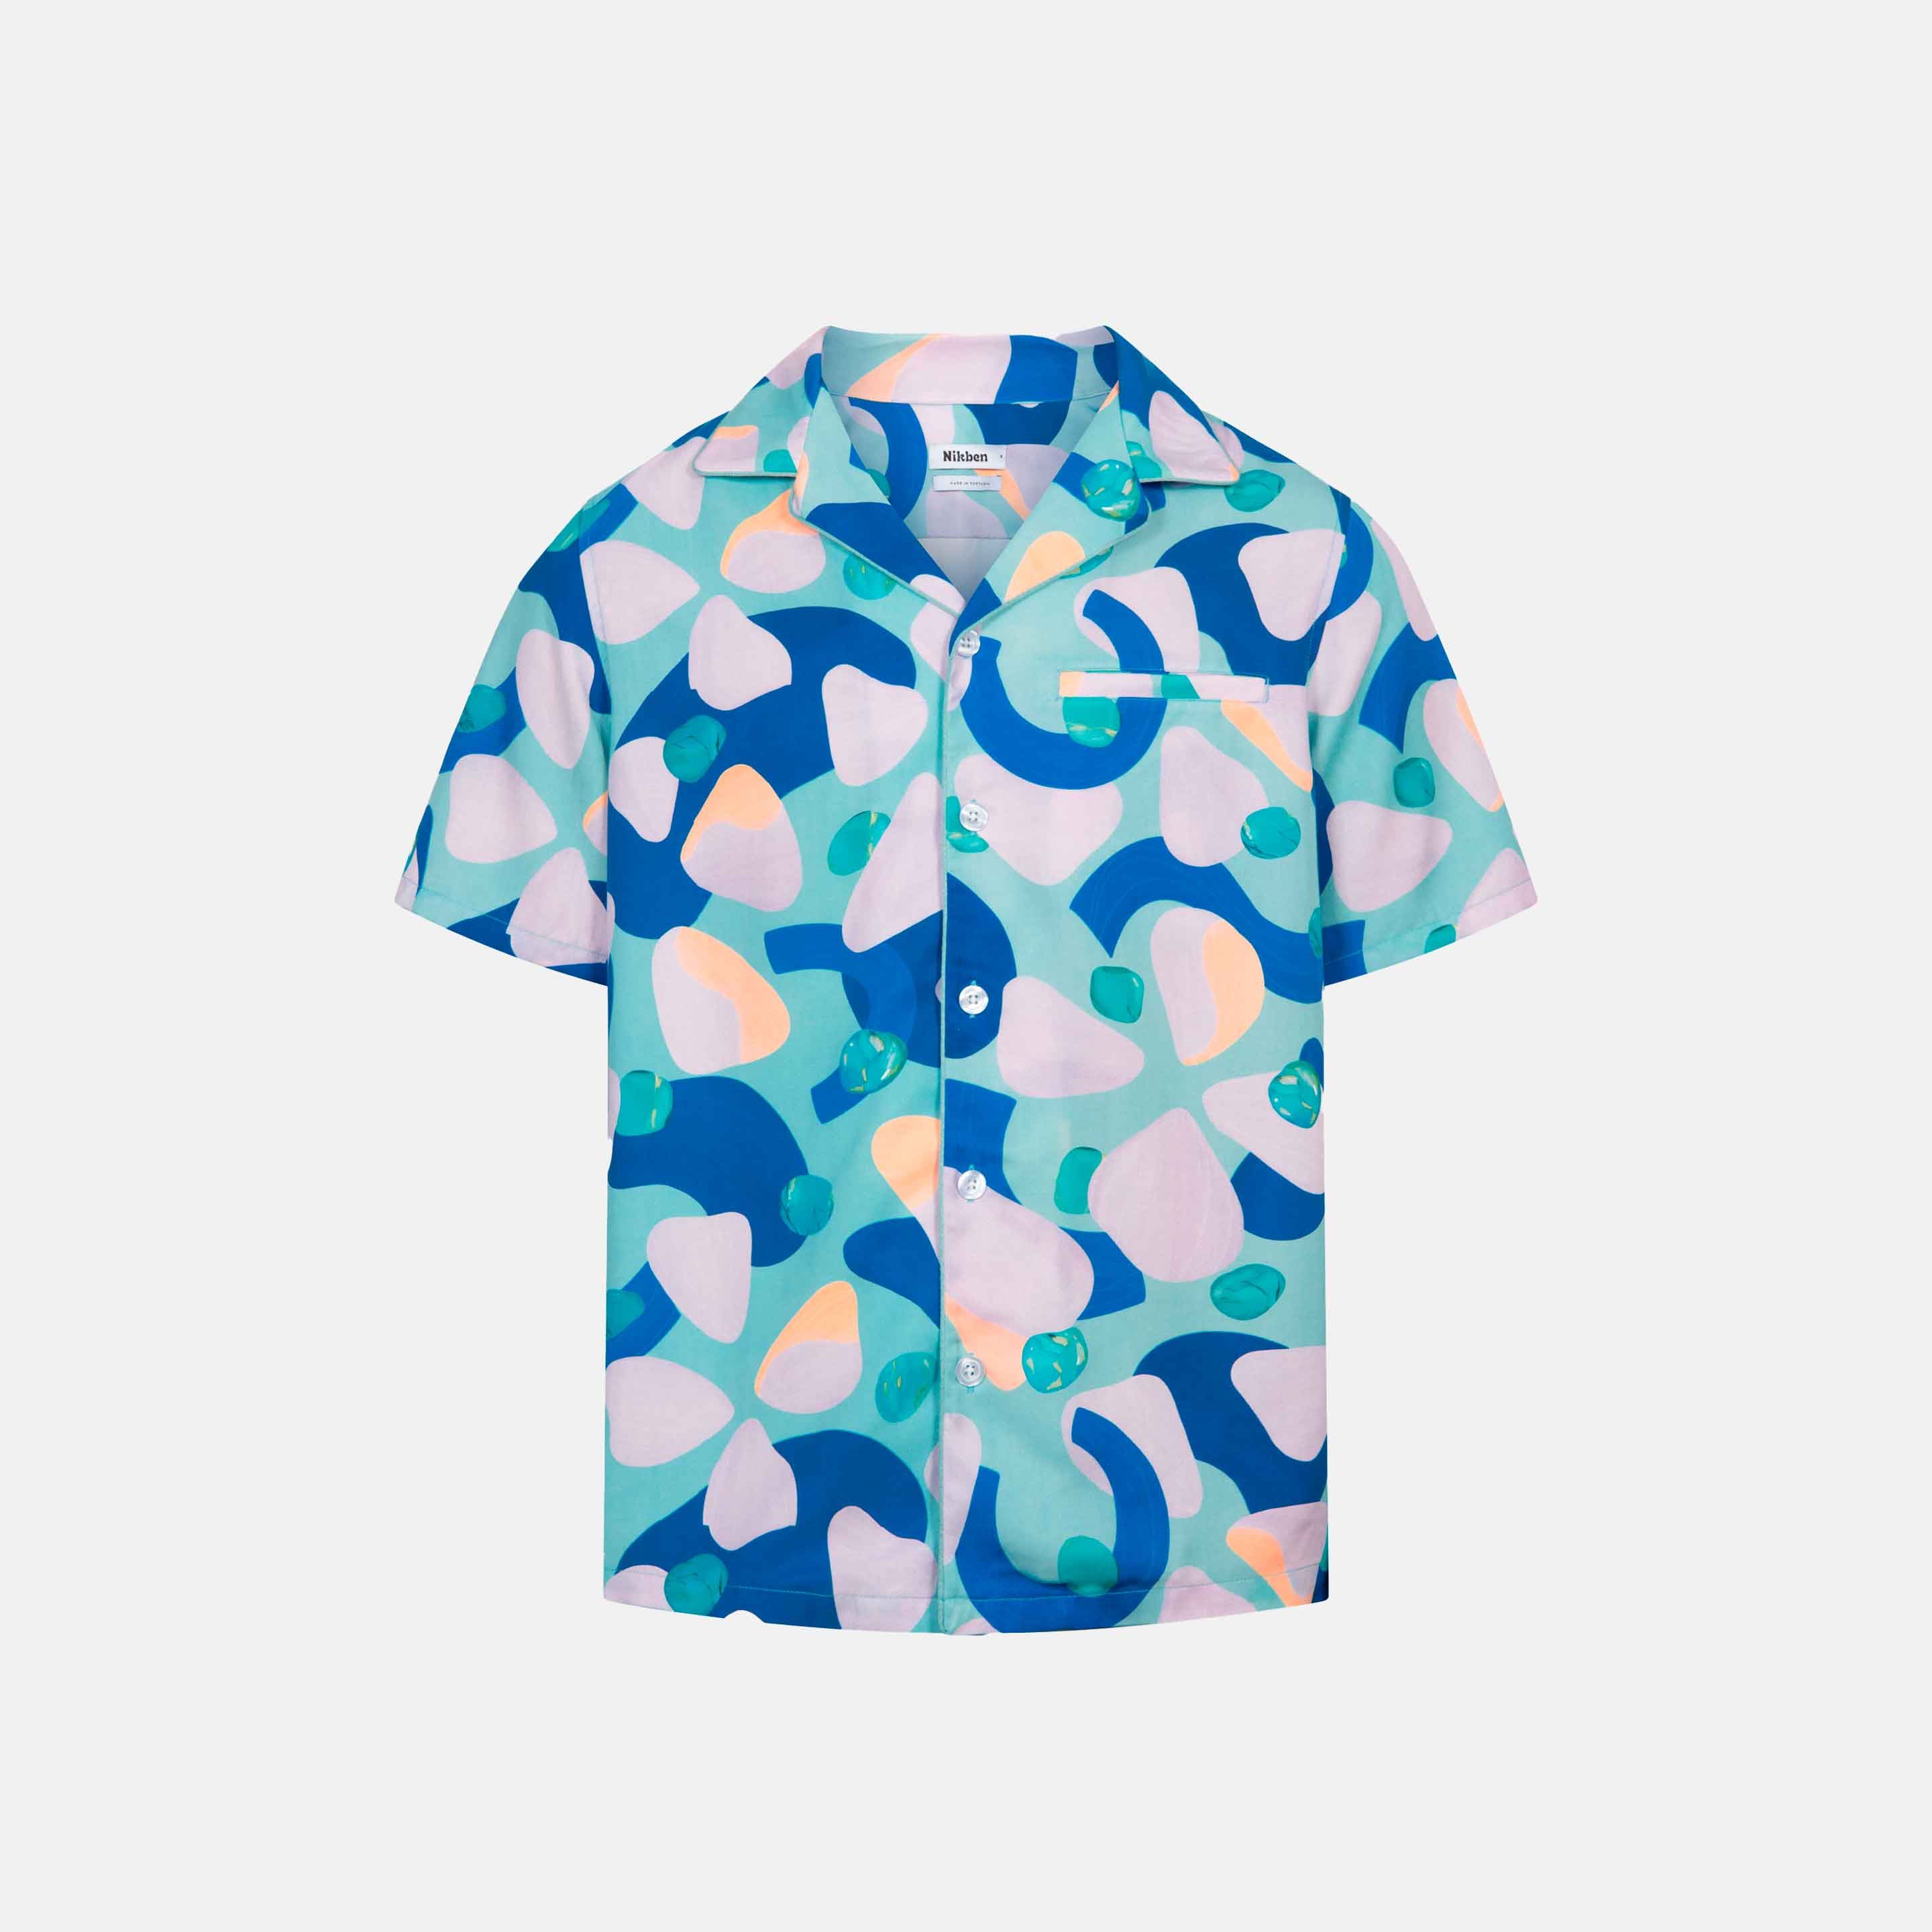 Short-sleeved vacation shirt with a multi-colored graphic patter, open collar, one breast pocket, and button closure.